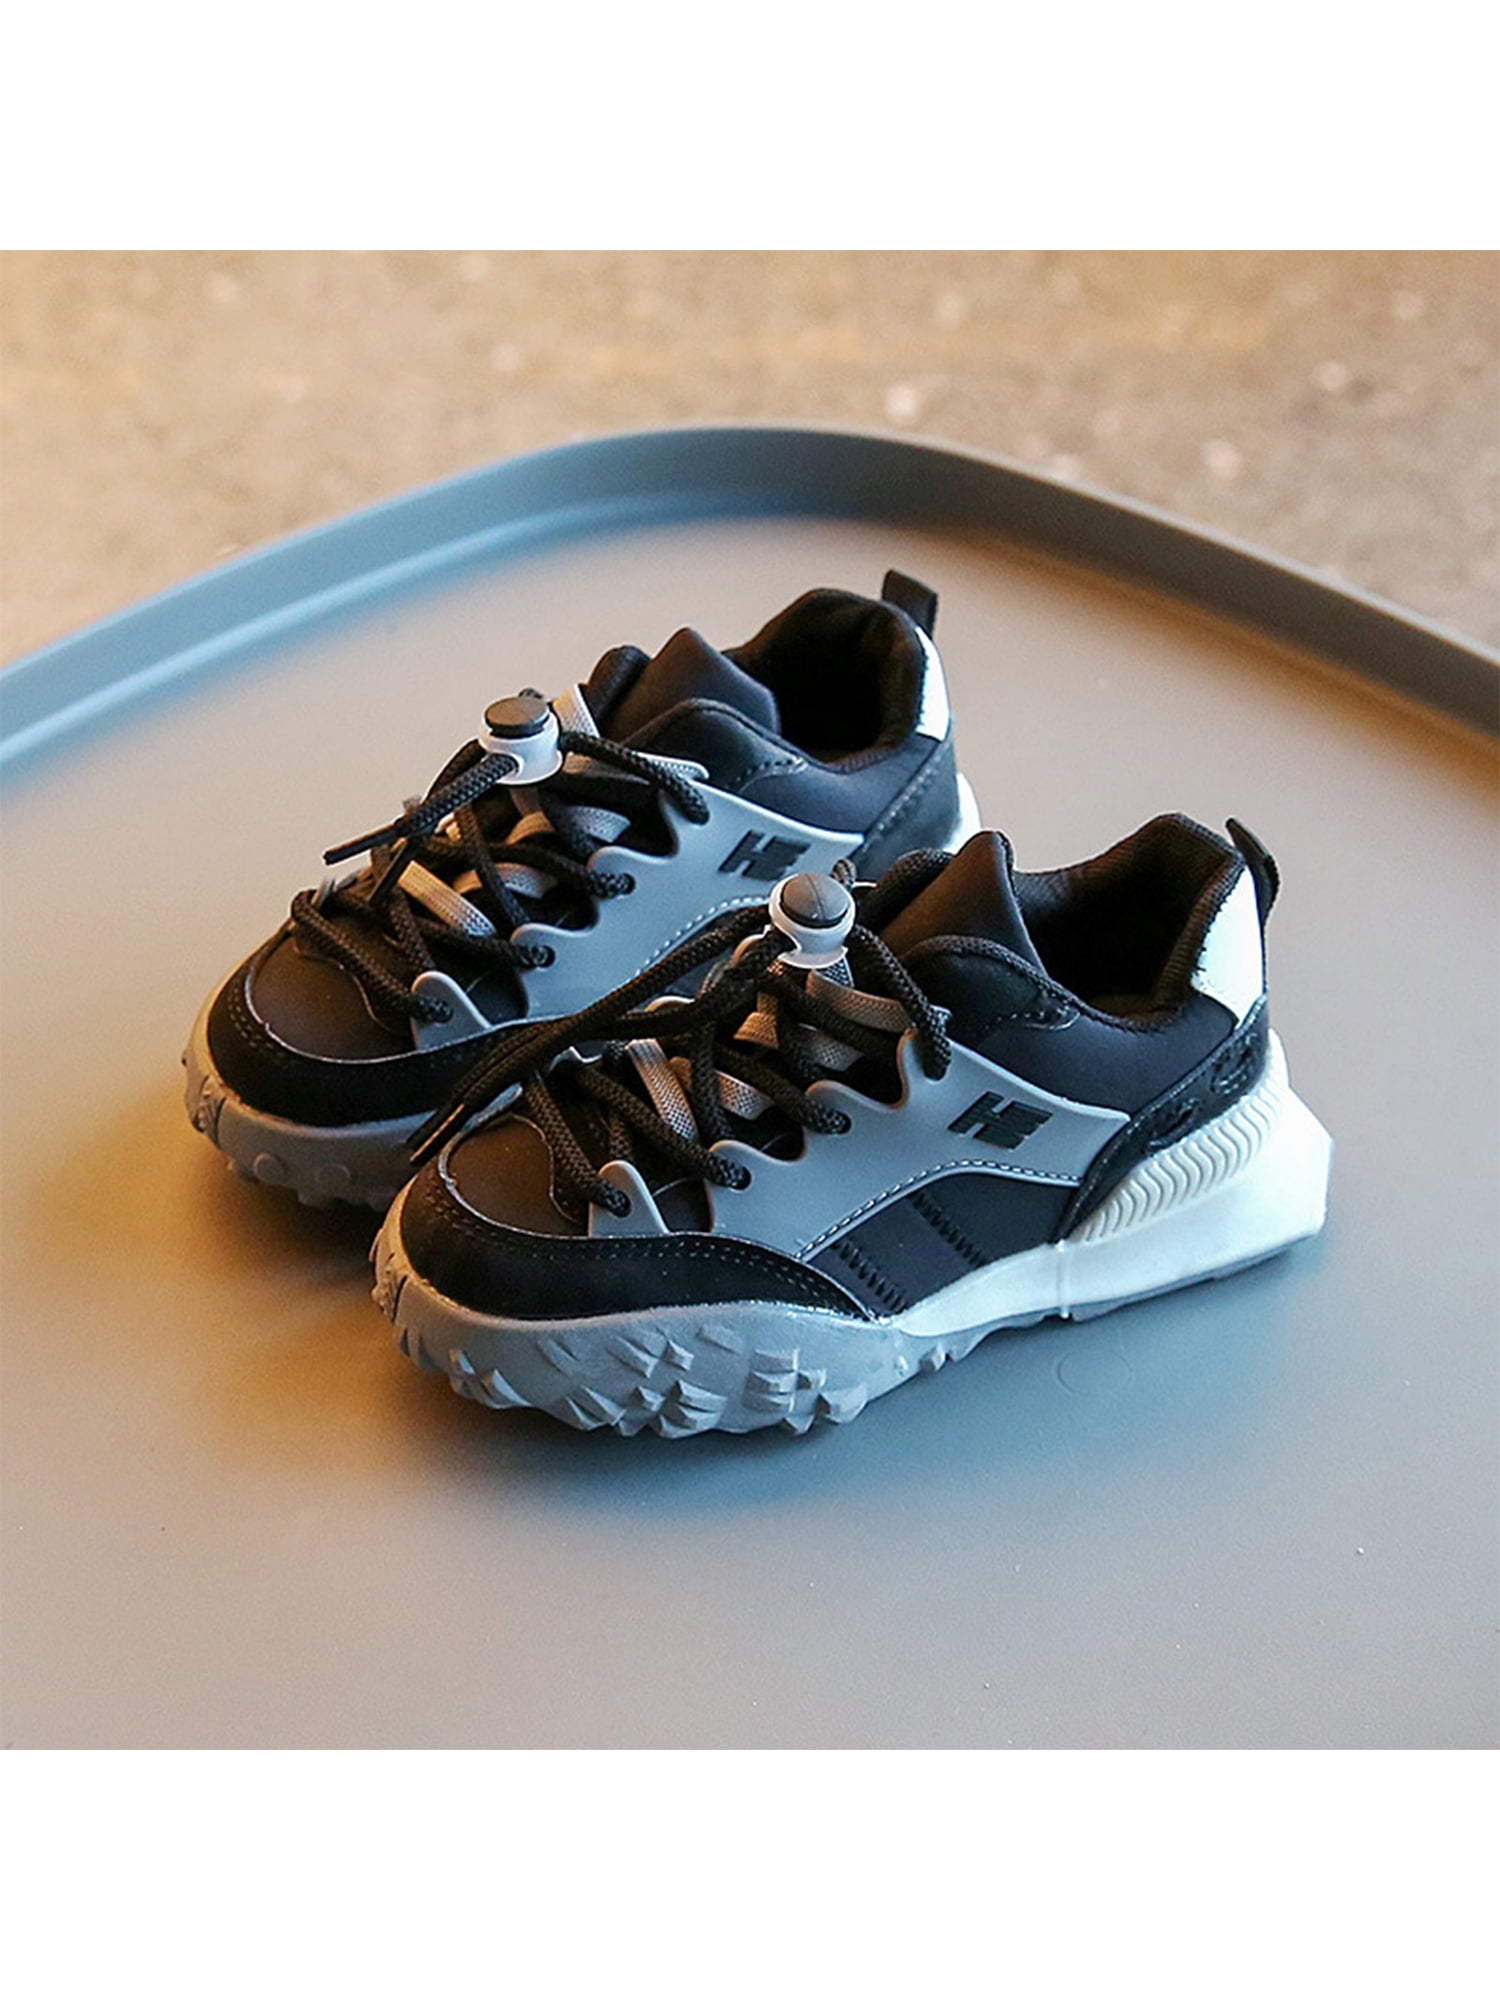 10c 9c 7c Brand New Boys/Girls Casual Black White Shoes White Lace  US 1Y 8c